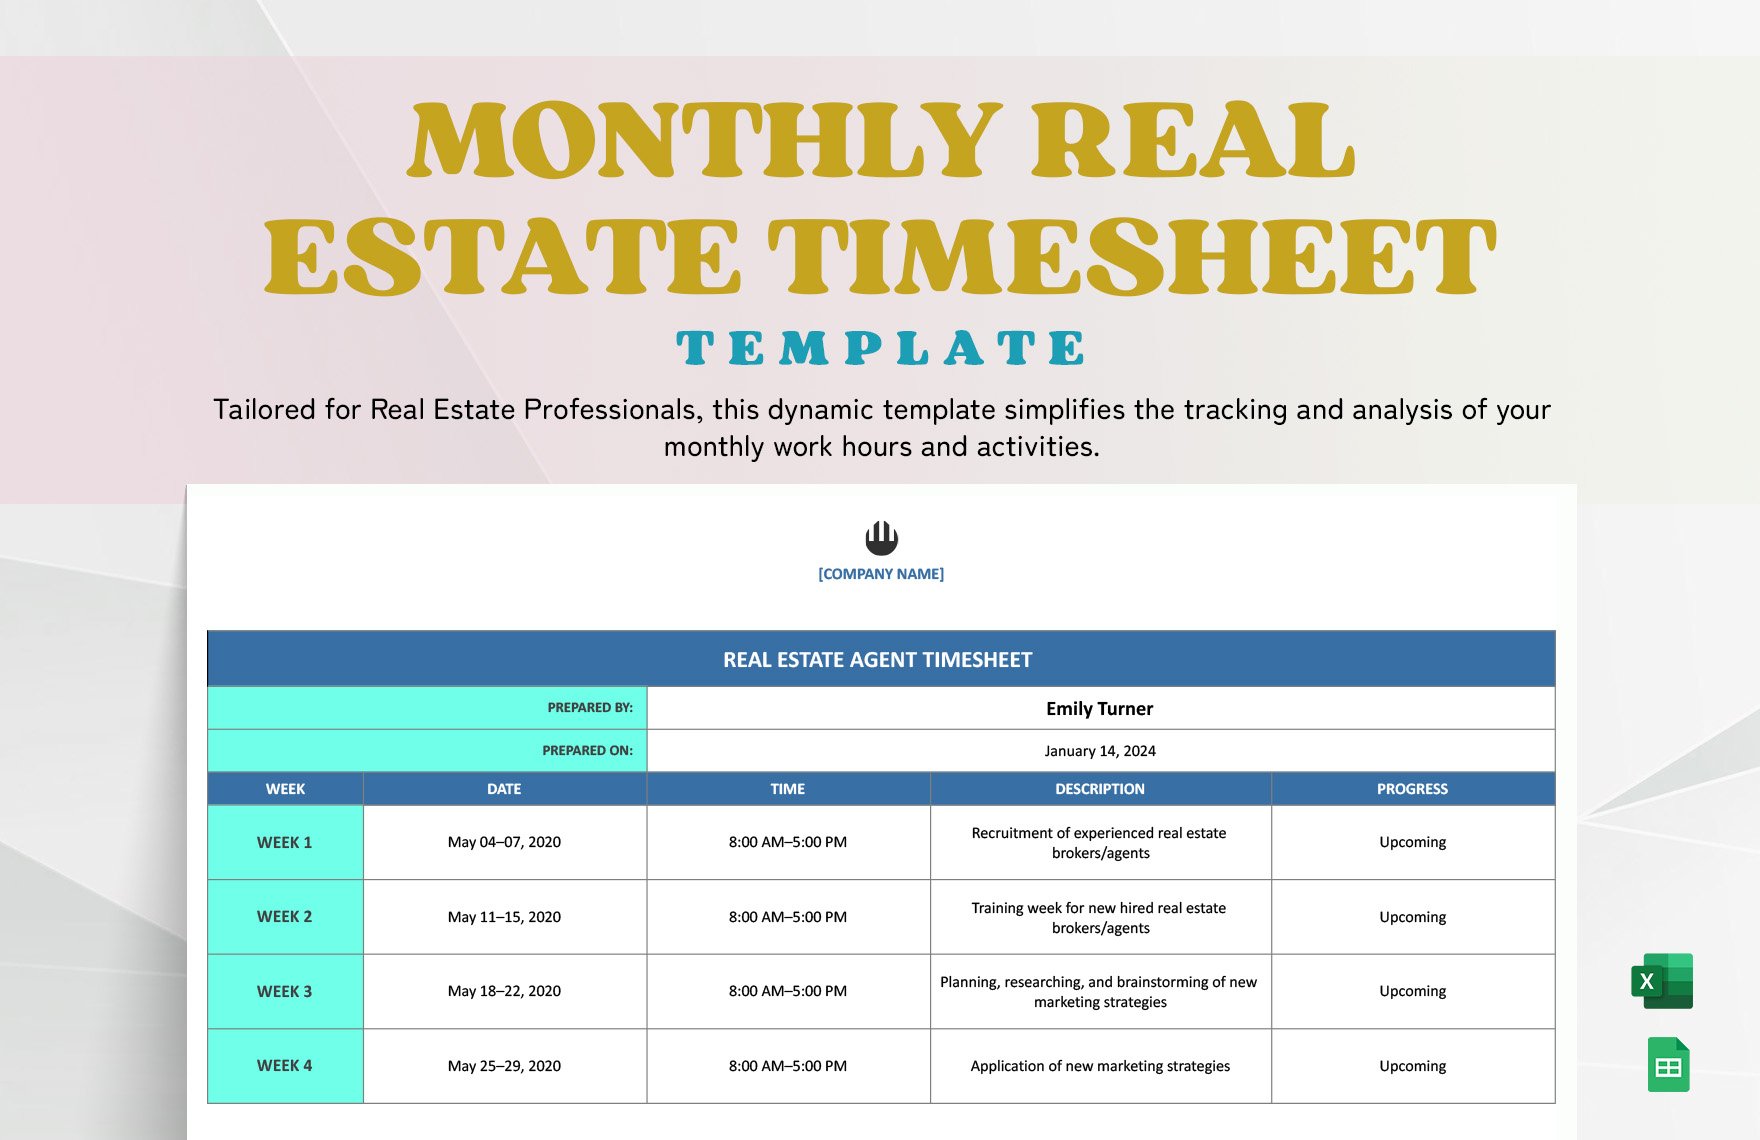 Monthly Real Estate Timesheet Template